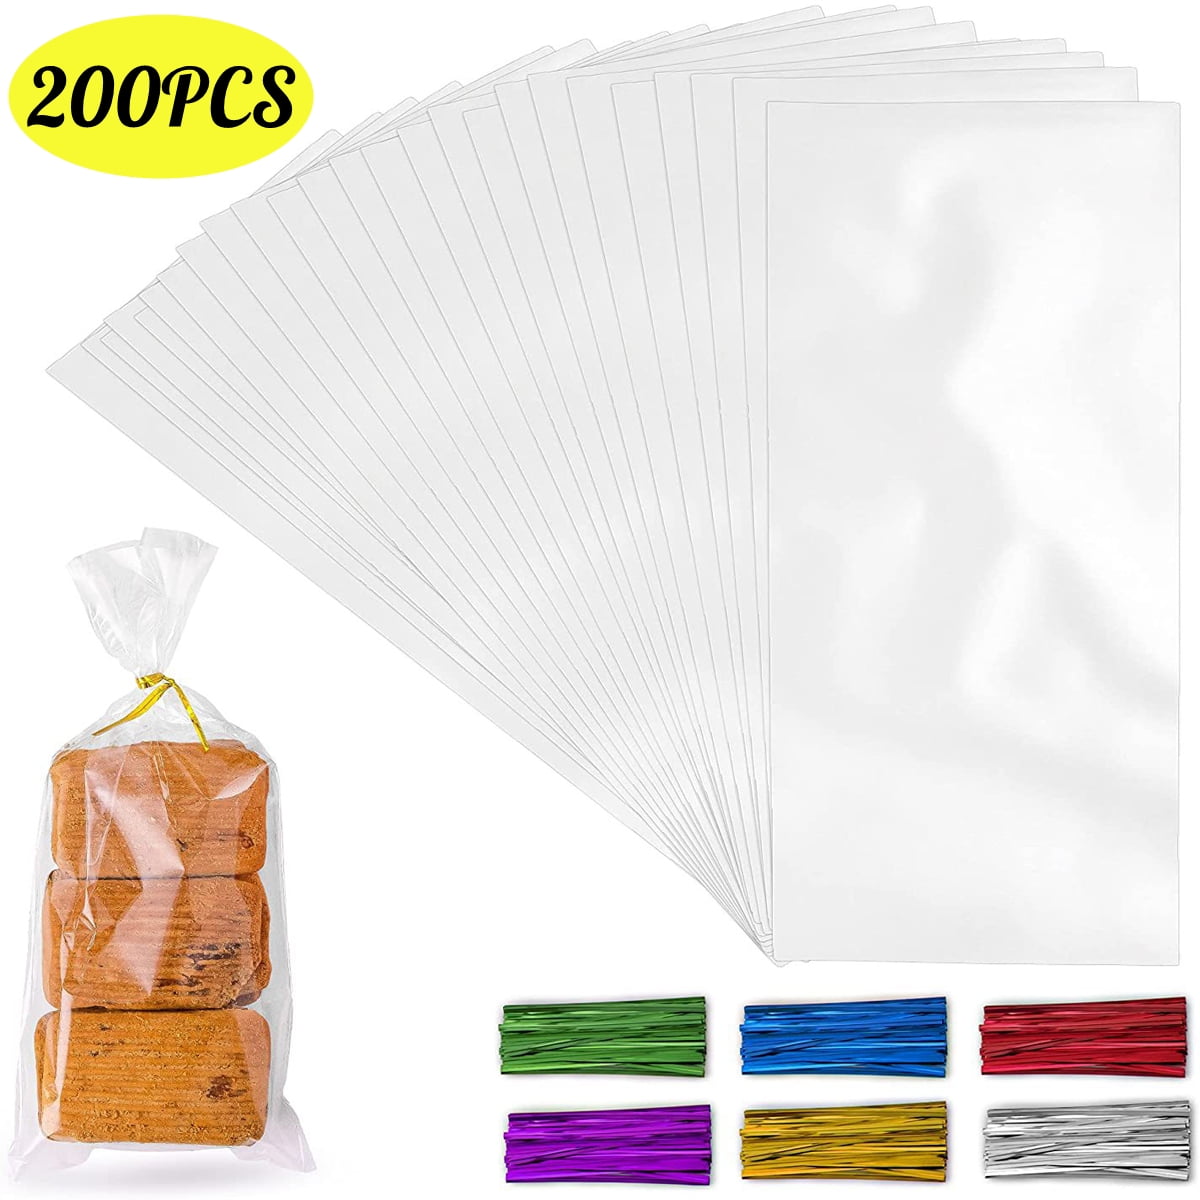 Cellophane Bags 9x12, 200pcs Clear Bags for Gifts Cello Bags with Twist Ties Cellophane Treat Goodie Bags for Party Wedding Birthday Gift Wrapping